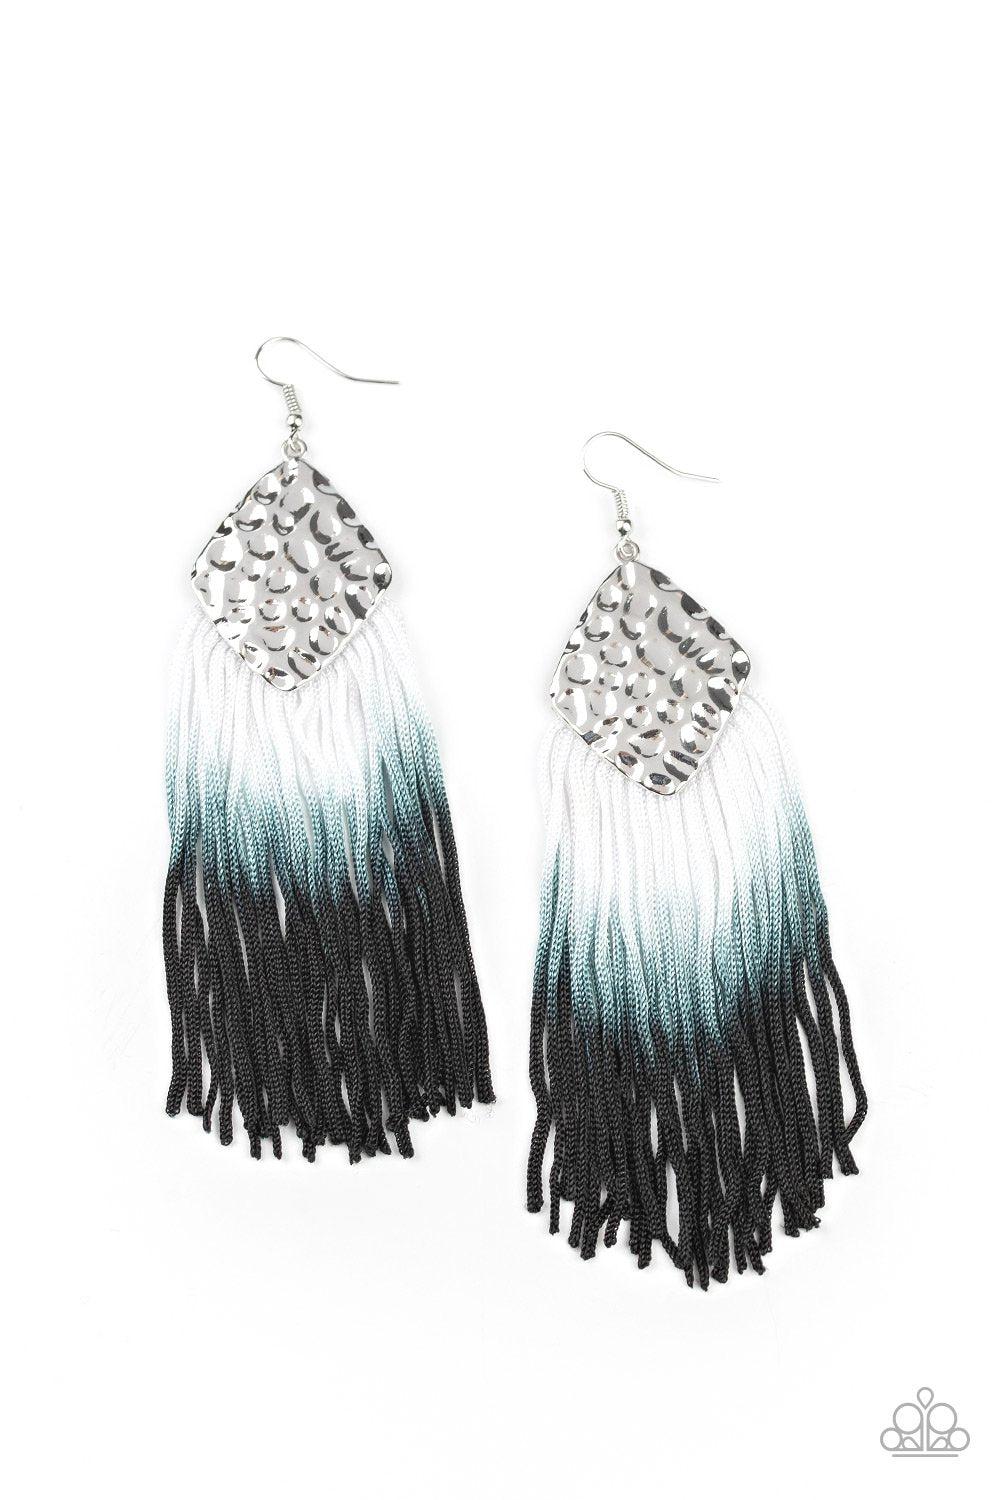 Dip In Black and Silver Ombre Tassel Earrings - Paparazzi Accessories-CarasShop.com - $5 Jewelry by Cara Jewels